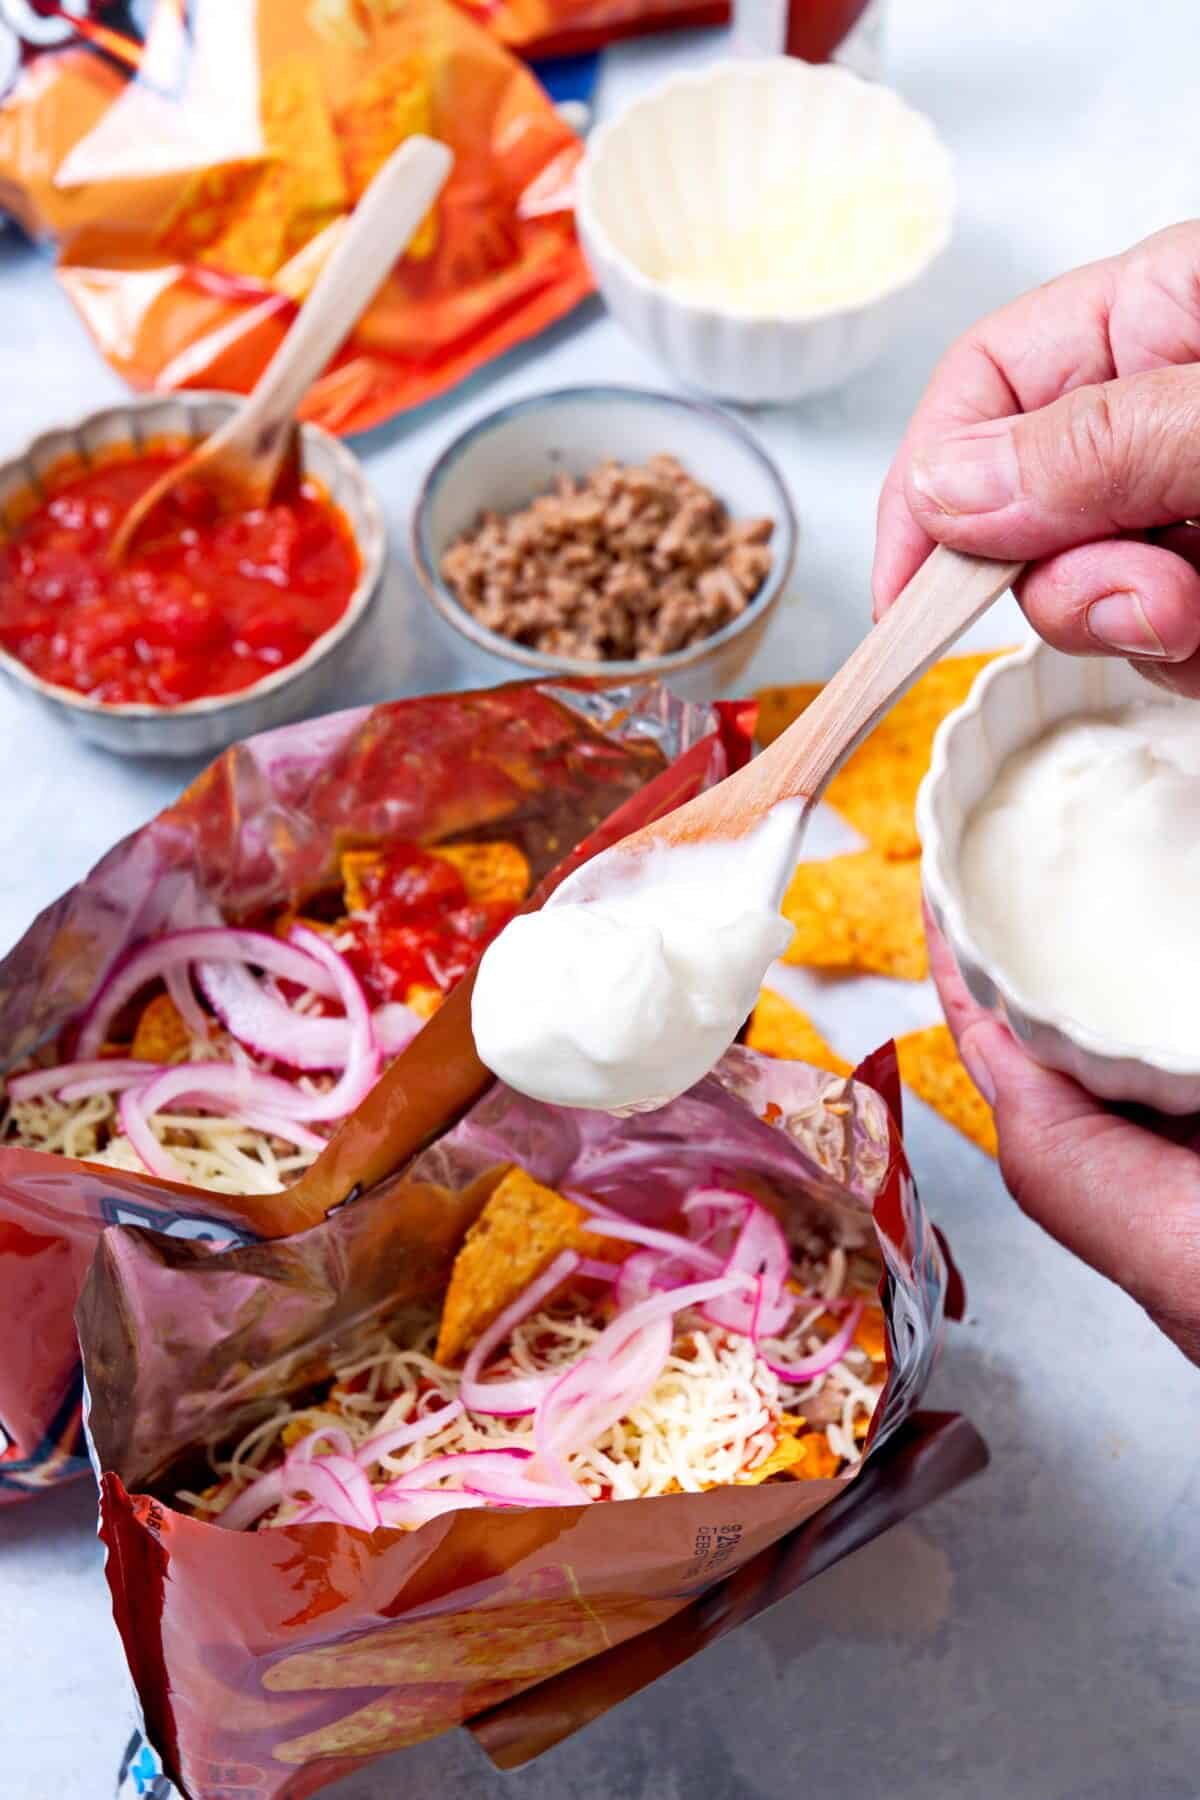 Open Dorito bags with taco filling and sour cream.